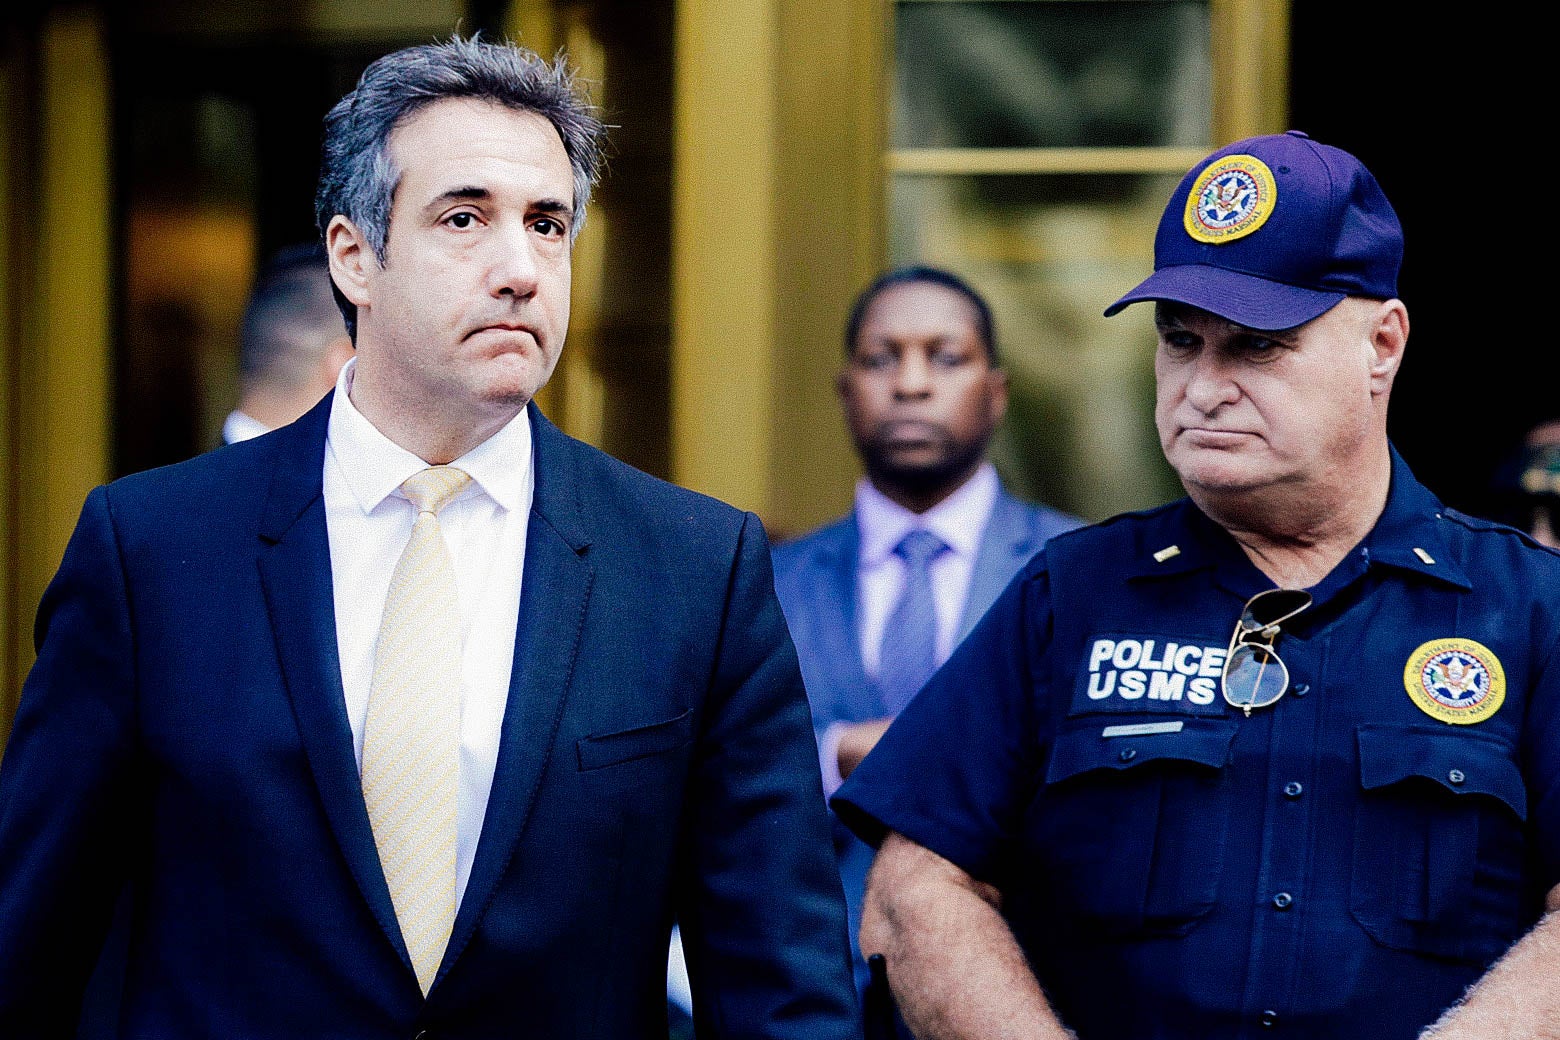 Michael Cohen, former lawyer to U.S. President Donald Trump, exits the Federal Courthouse on August 21, 2018 in New York City.